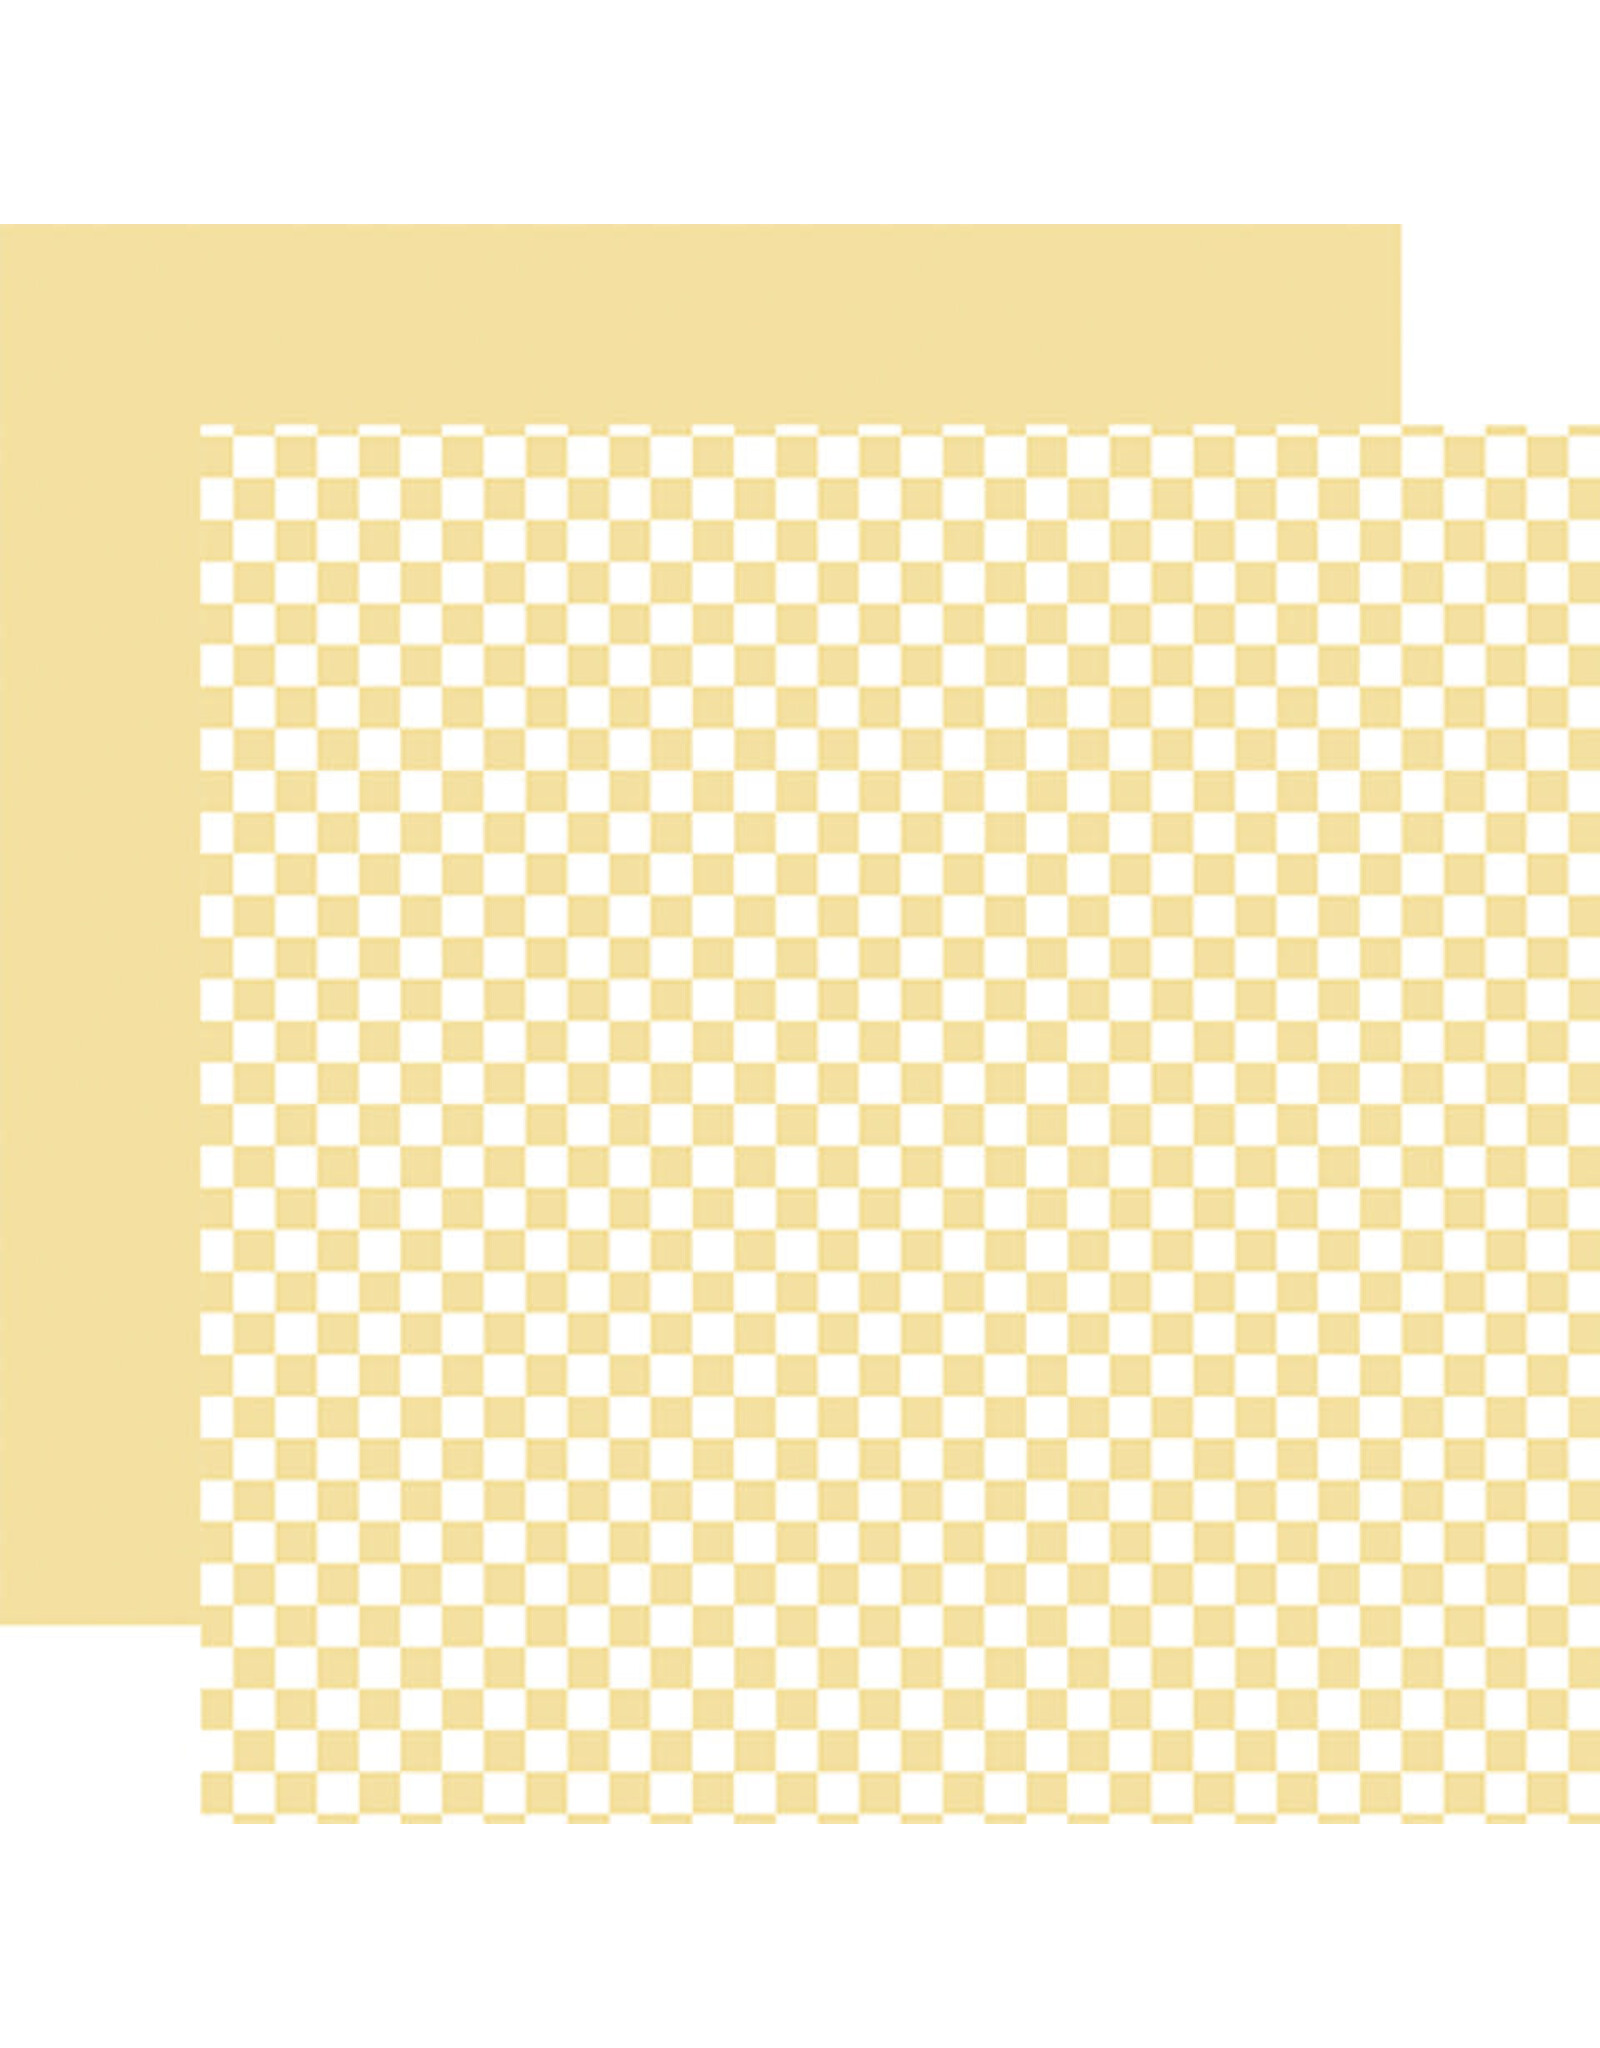 Echo Park Checkerboard:  Yellow 12x12 Patterned Paper